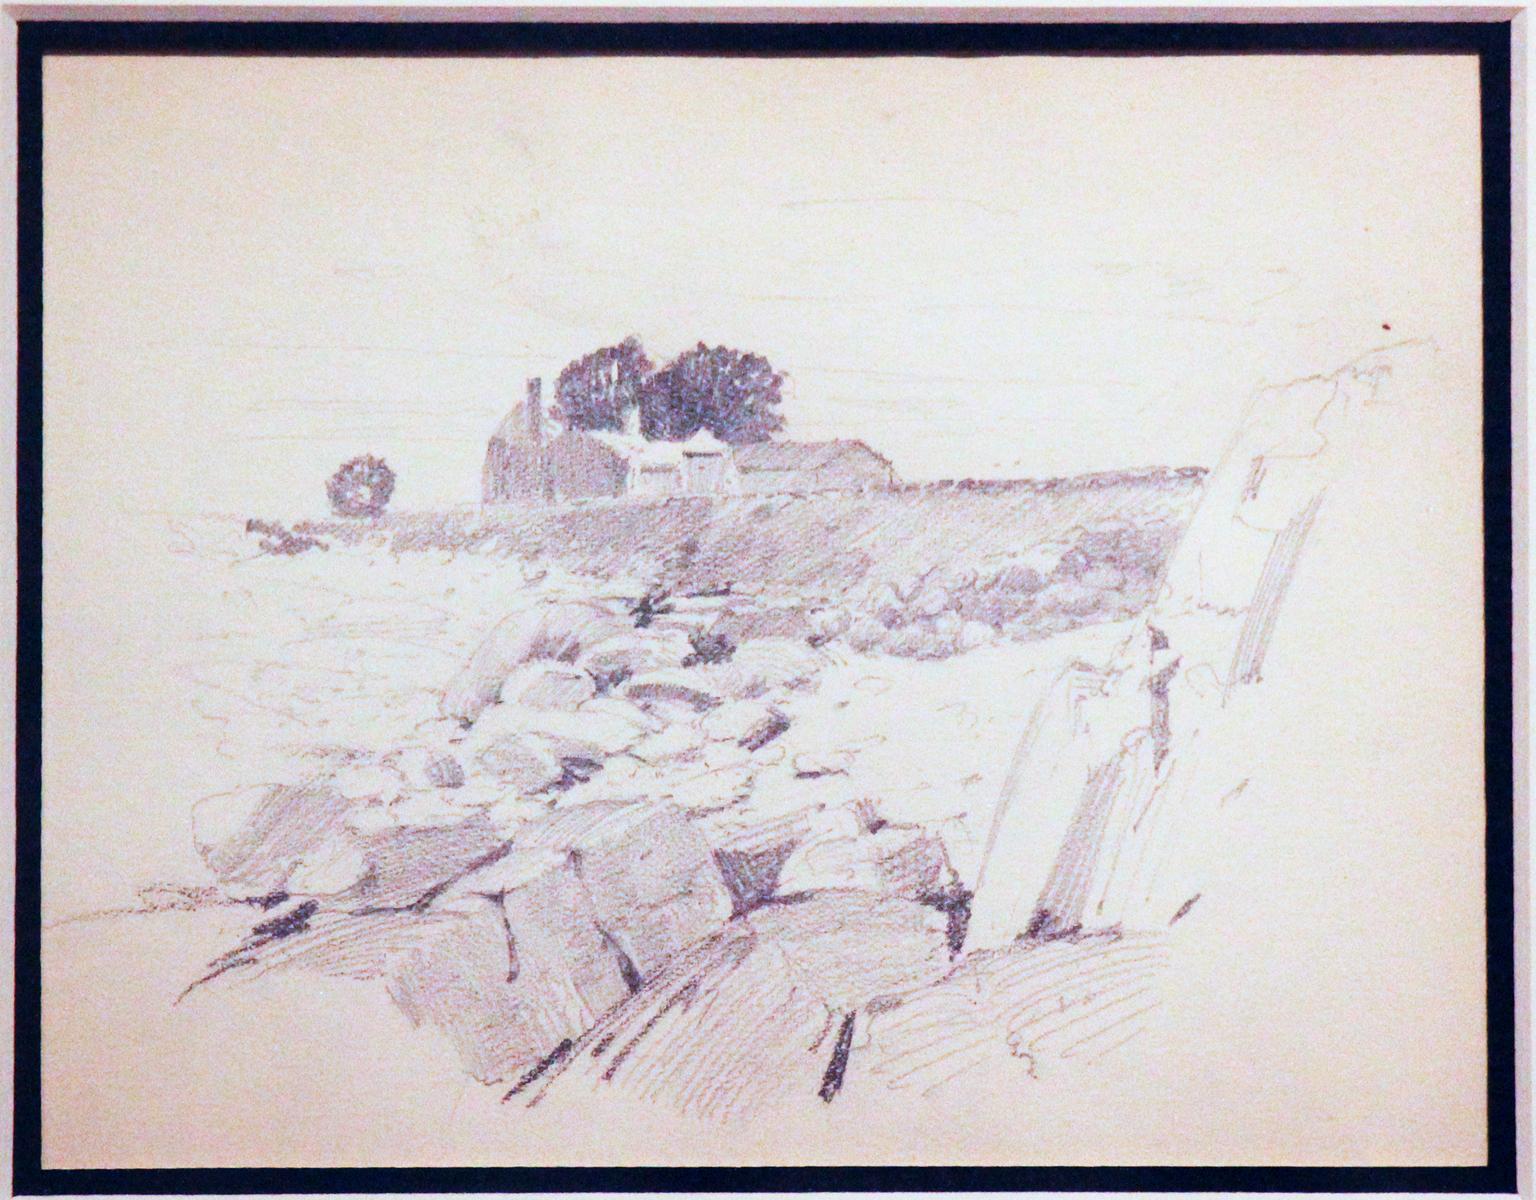 Rocks and Farmhouse, American Impressionist, Miniature Pencil Drawing, 1899 - Art by Henry Bayley Snell